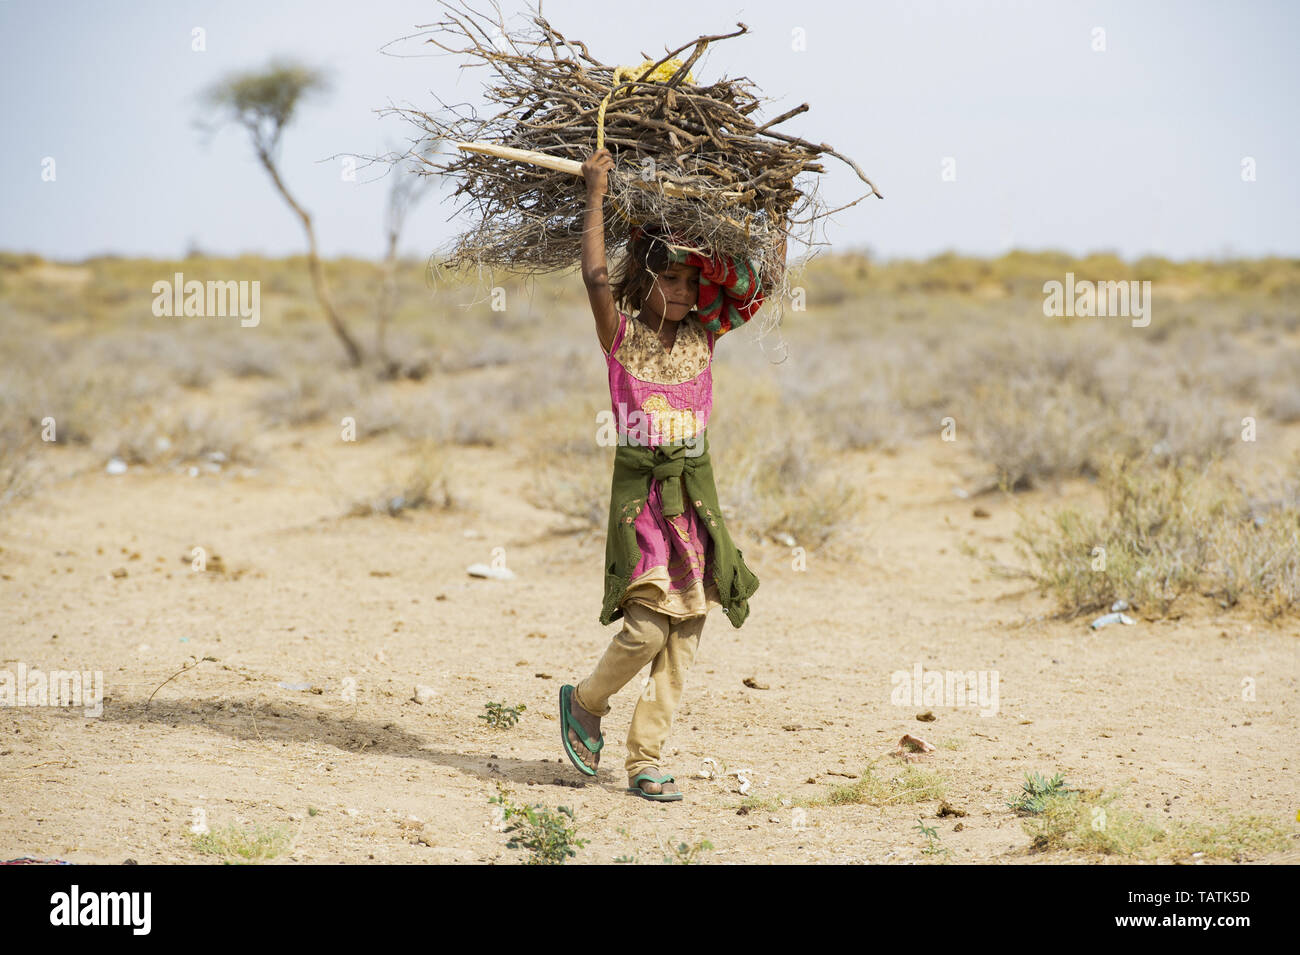 A poor and young girl is carrying heavy bunches of dry wood on her head in the middle of the Thar Desert. Stock Photo